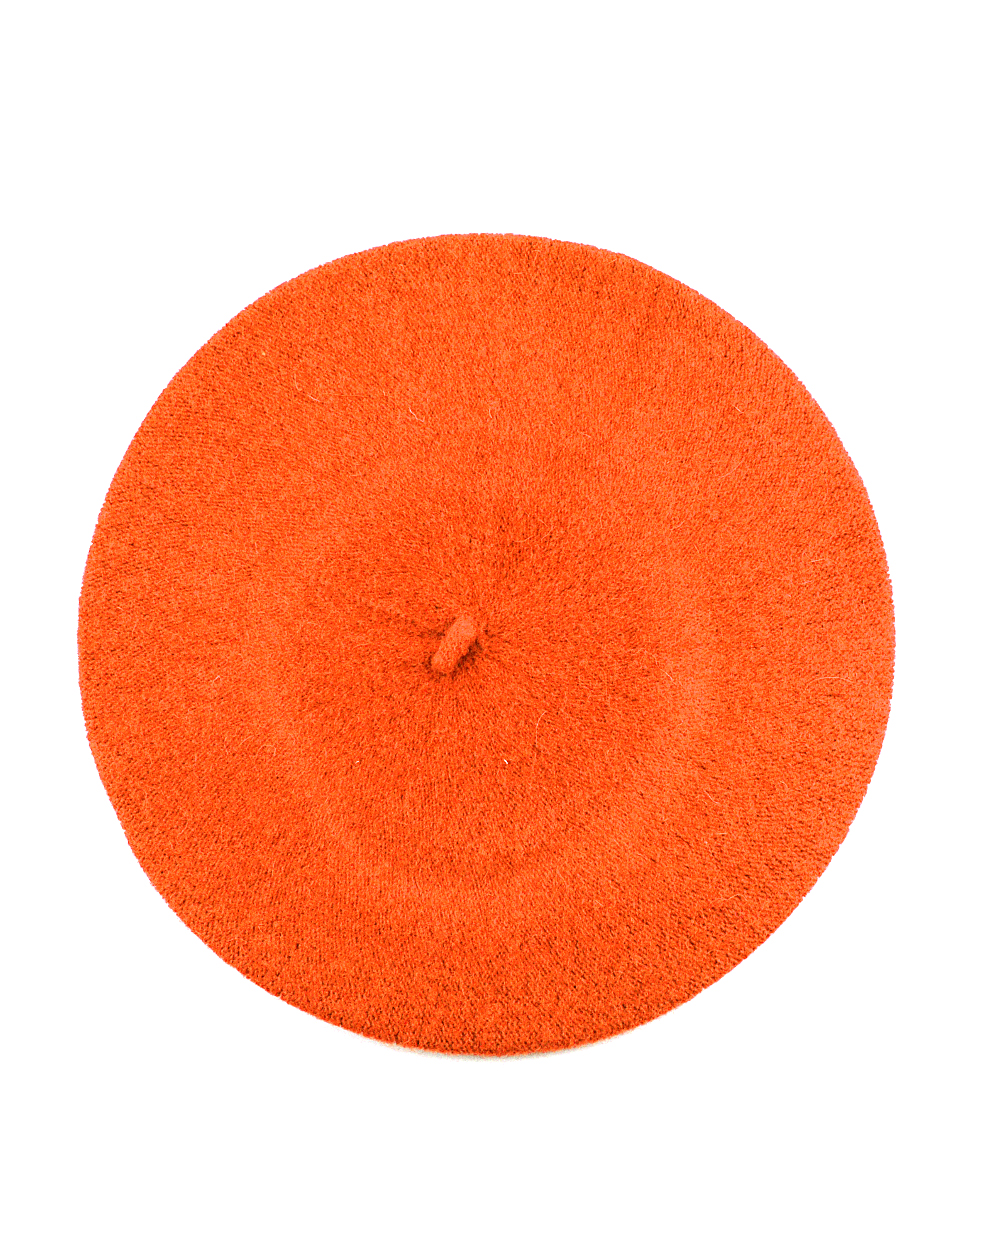 NYFASHION101 French Style Lightweight Casual Classic Solid Color Wool Beret, Orange - image 1 of 2